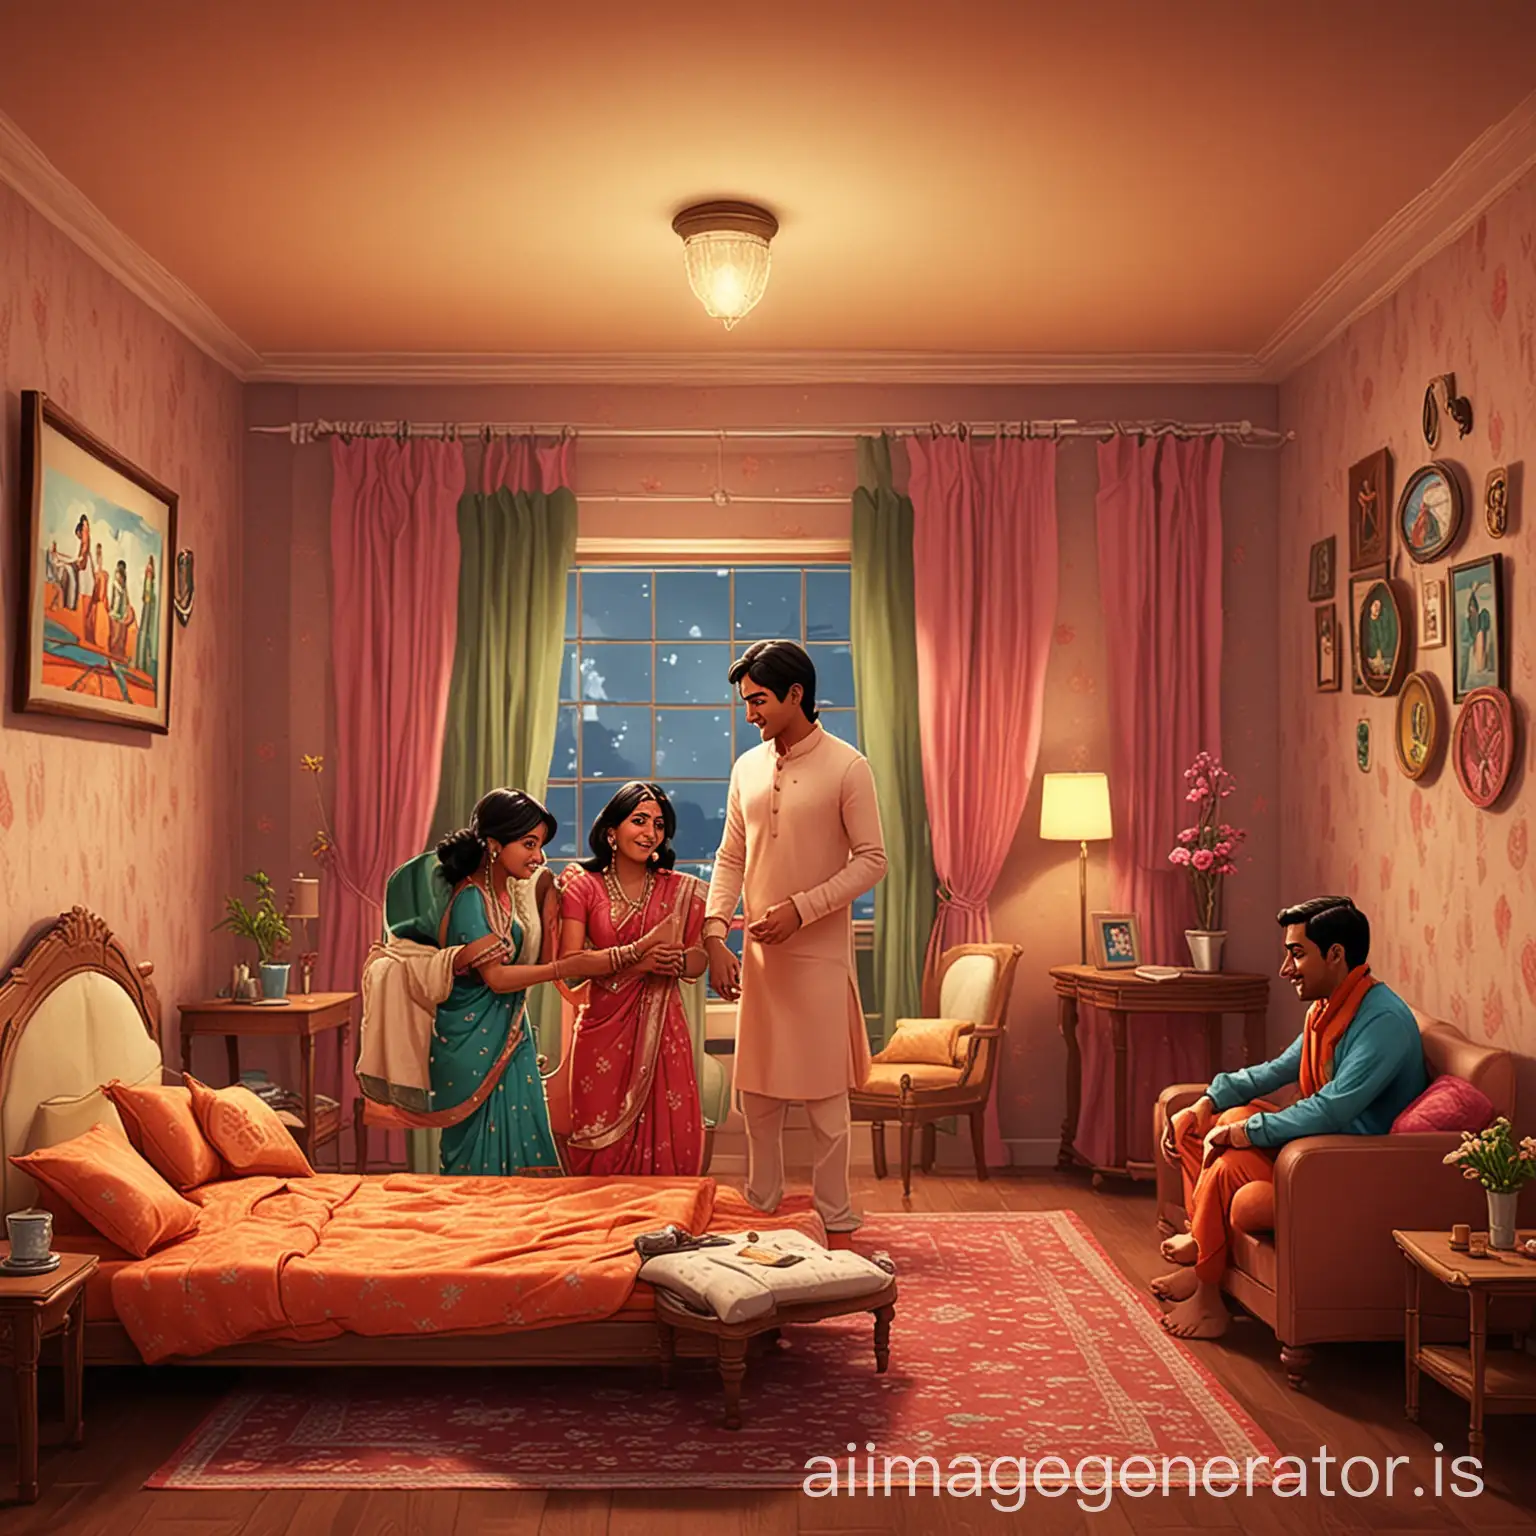 Romantic-Indian-Couples-in-Cartoon-Room-Setting